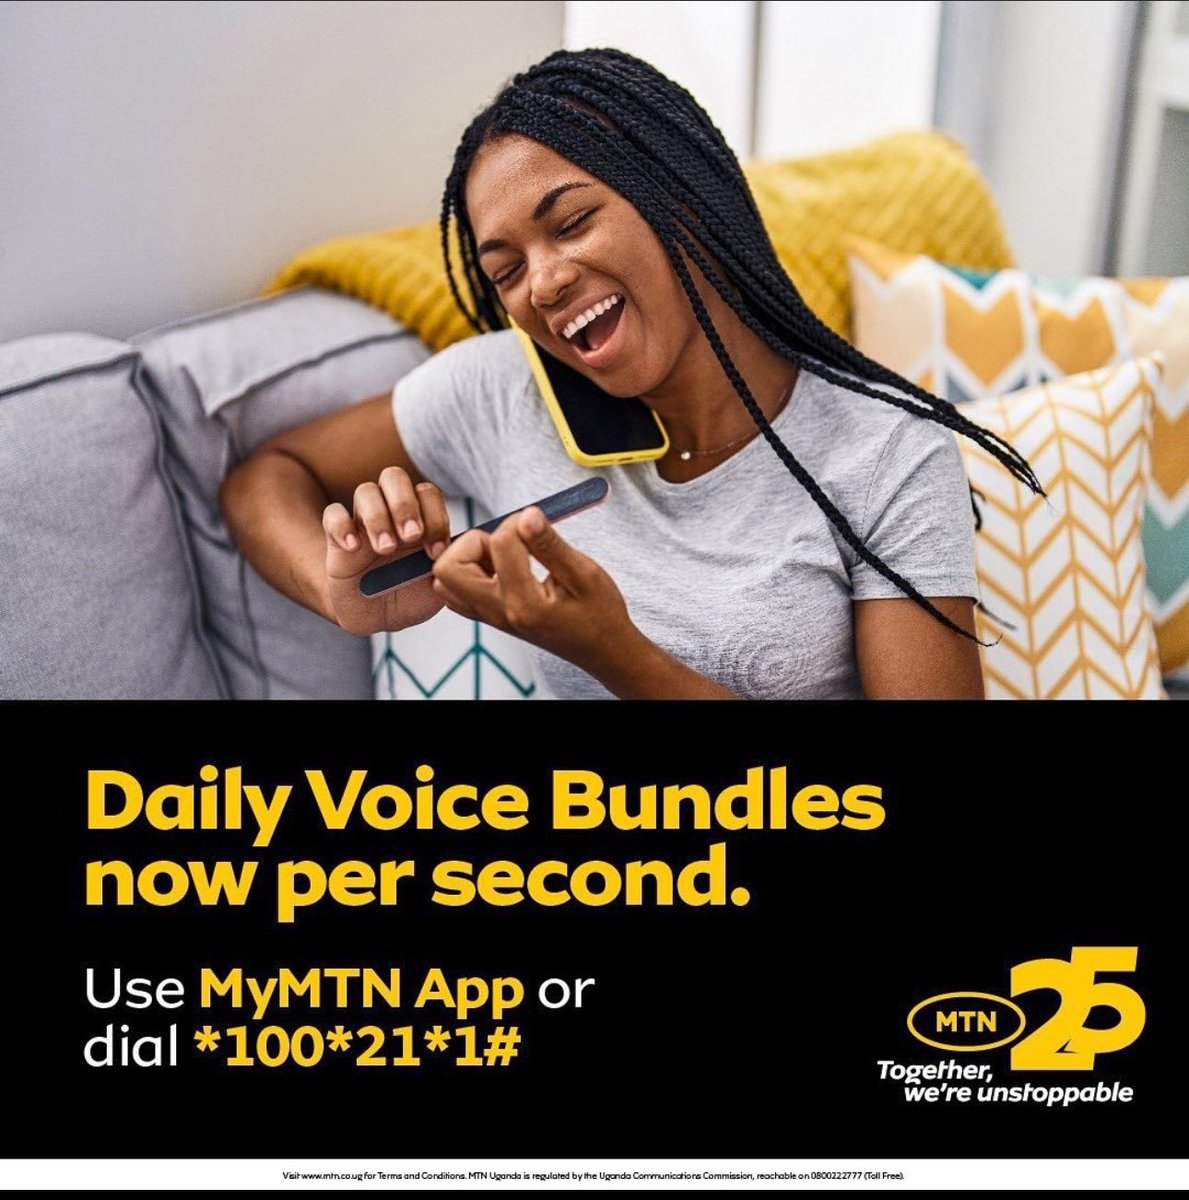 Were you aware that daily voice bundles are now charged per second? Utilize the MyMTN app or dial *100*21#. 

#MTNVoiceBundles
#TogetherWeAreUnstoppable